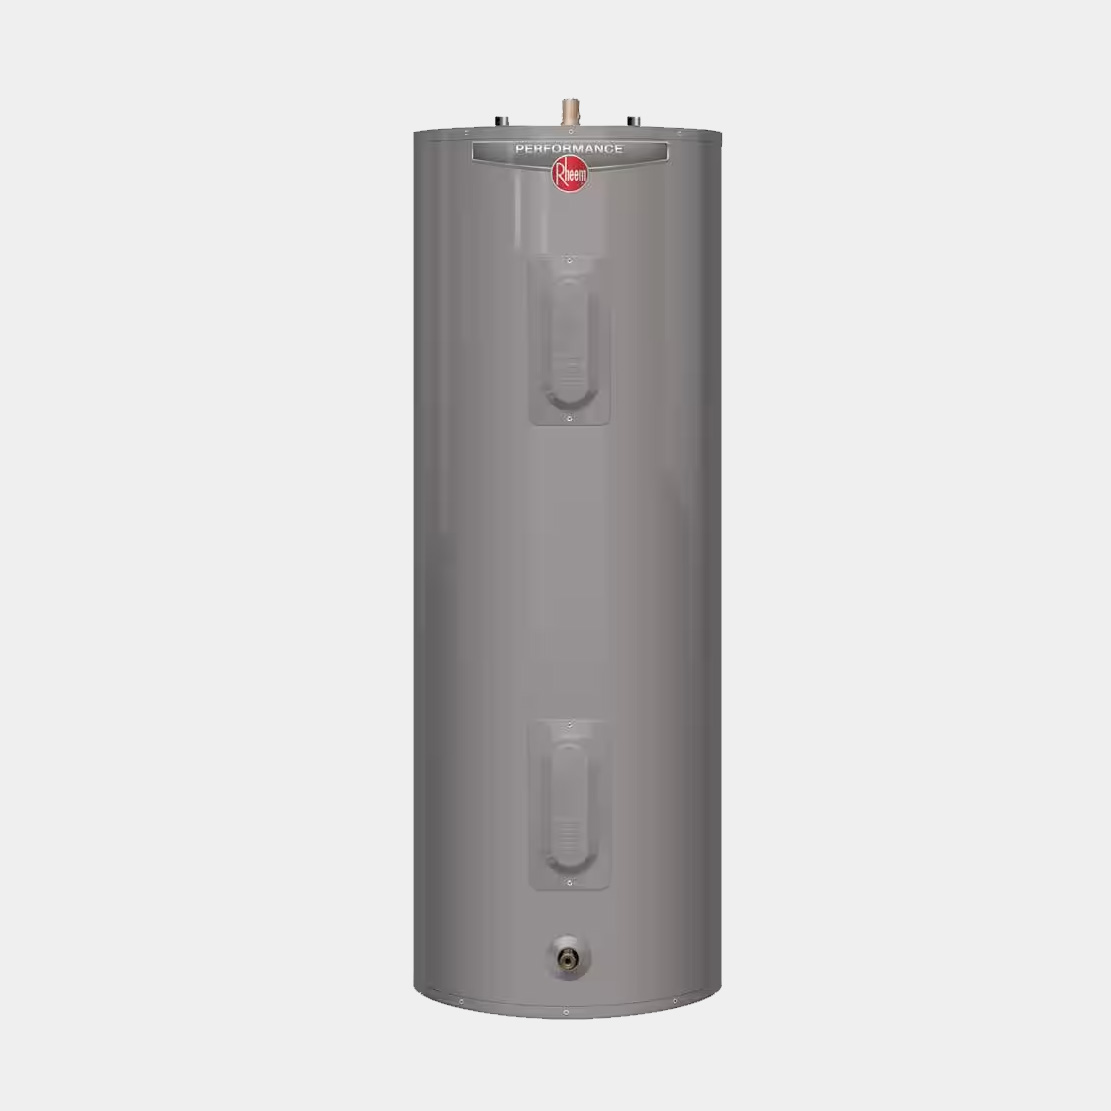 Electric Water Heater Services in Kettering, Ohio